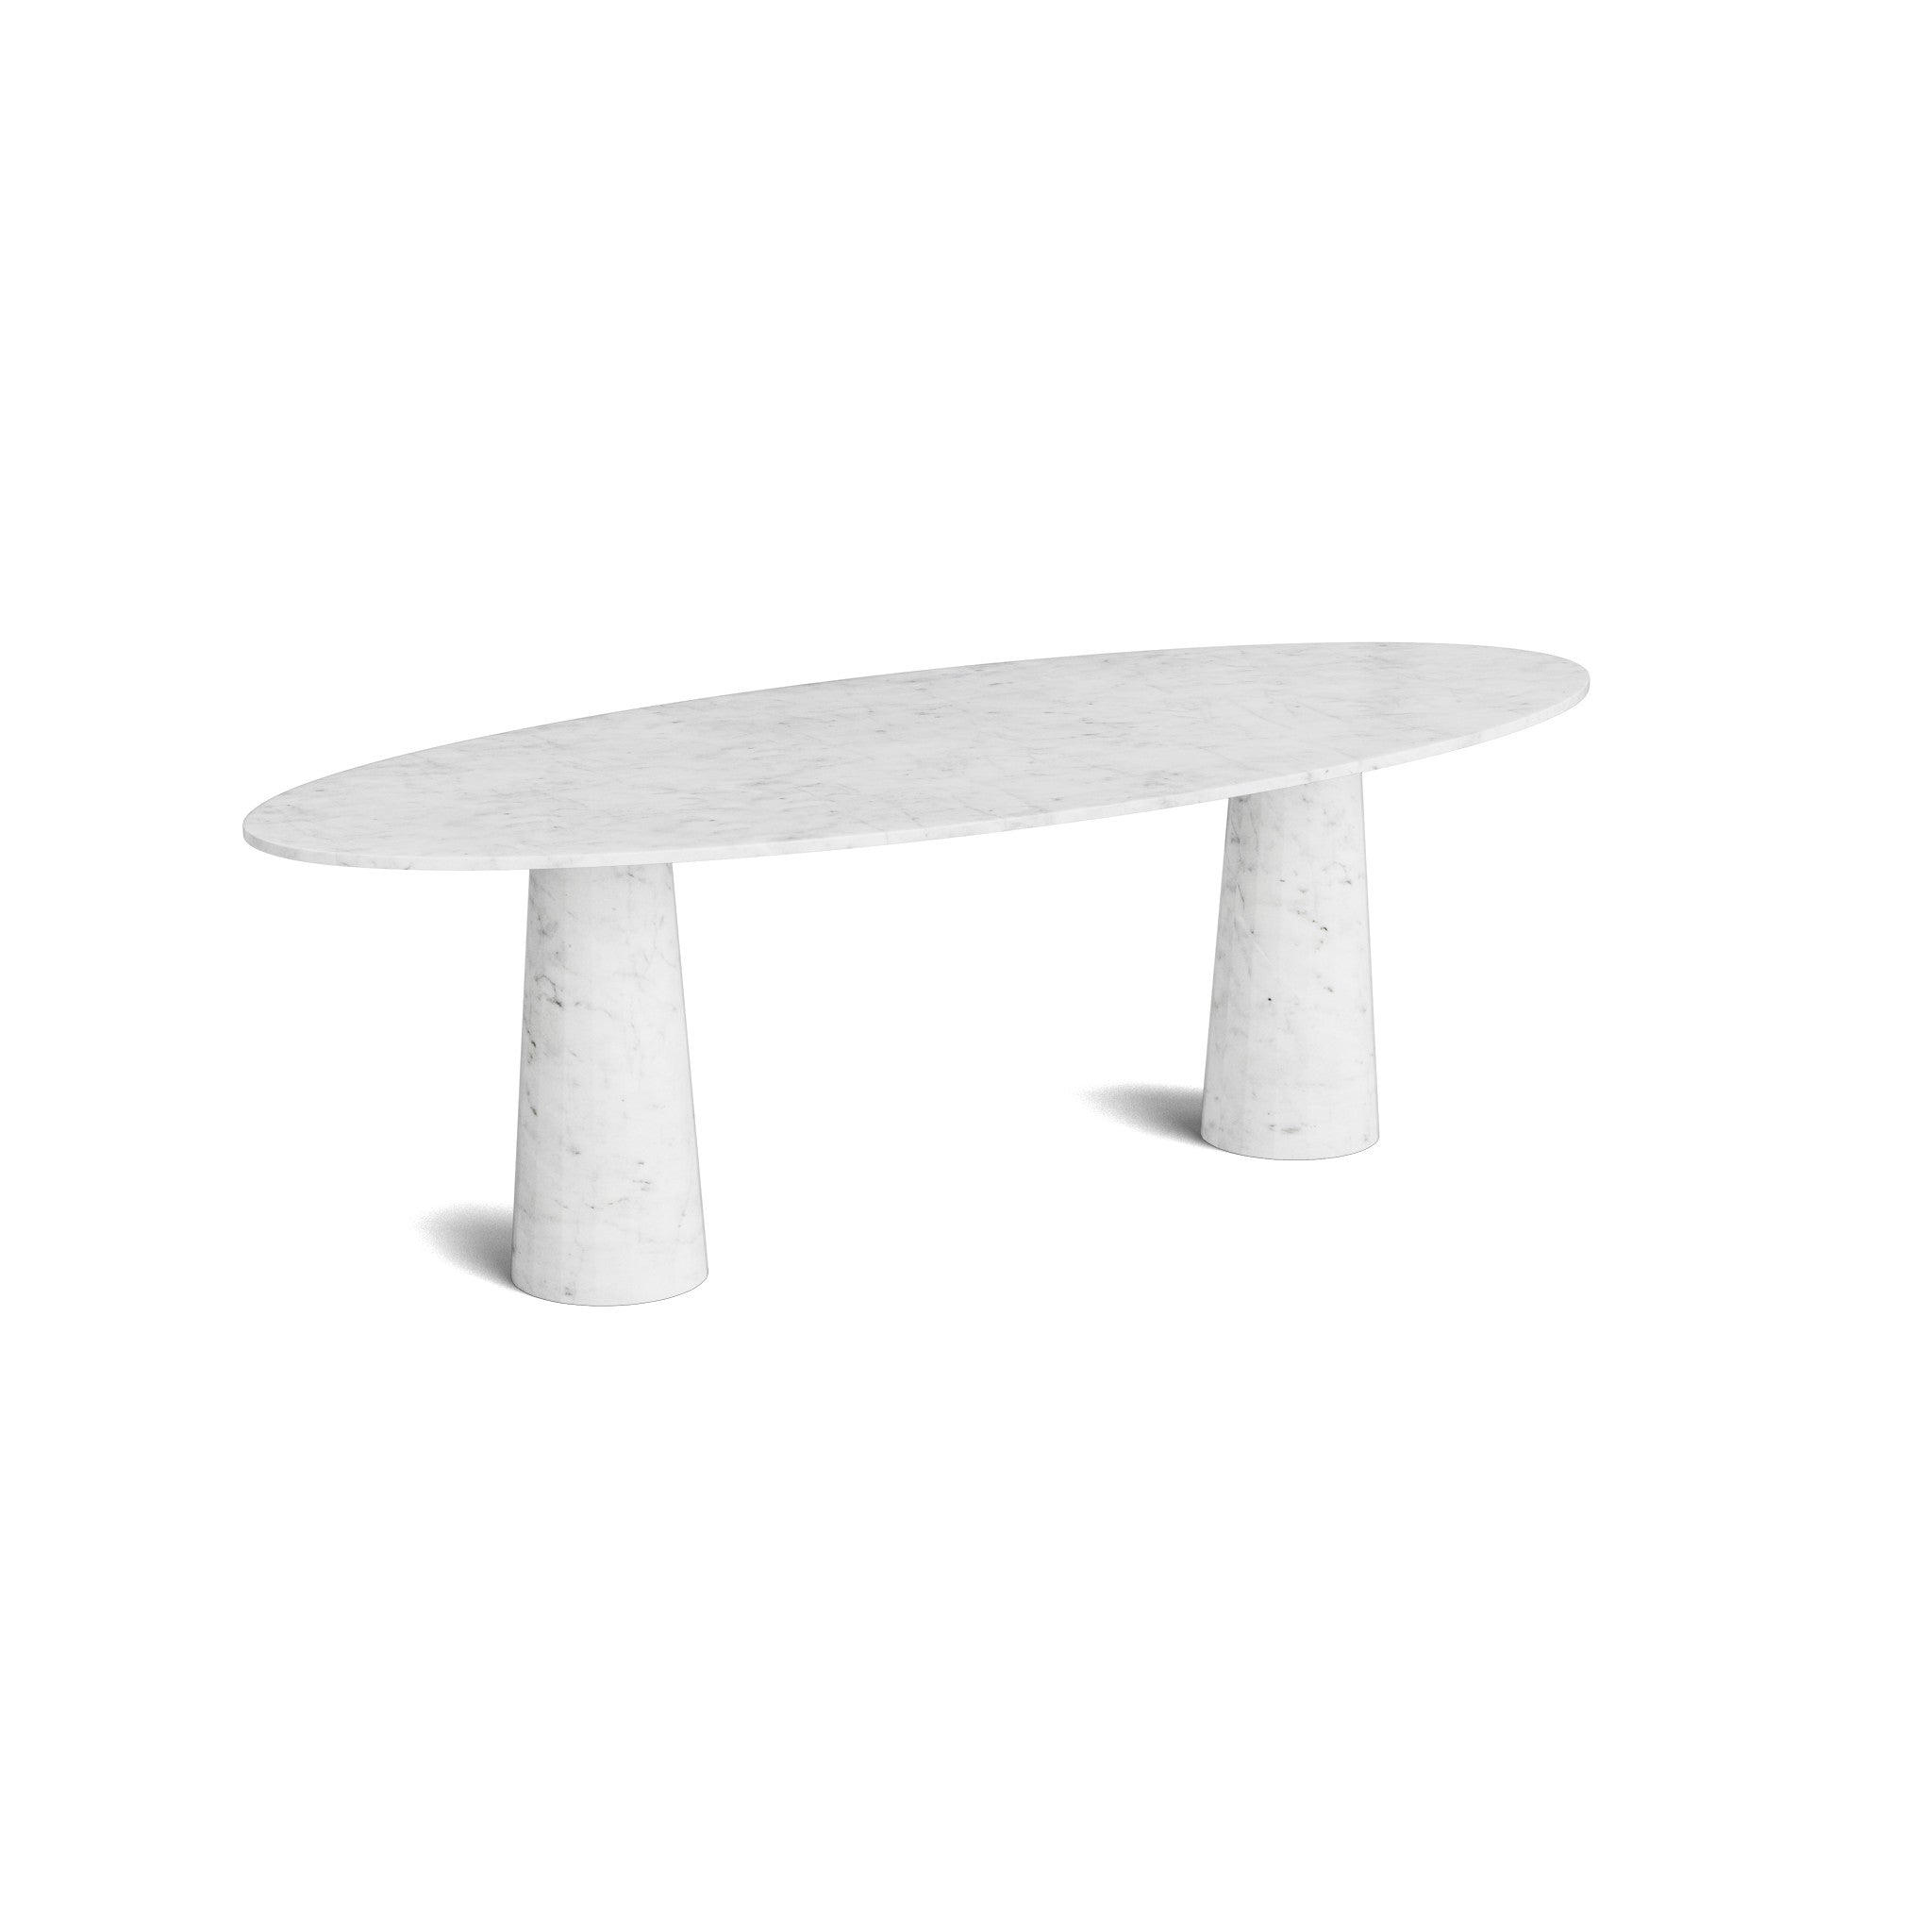 Marble oval dining table - Bianco - Pebble - Polished